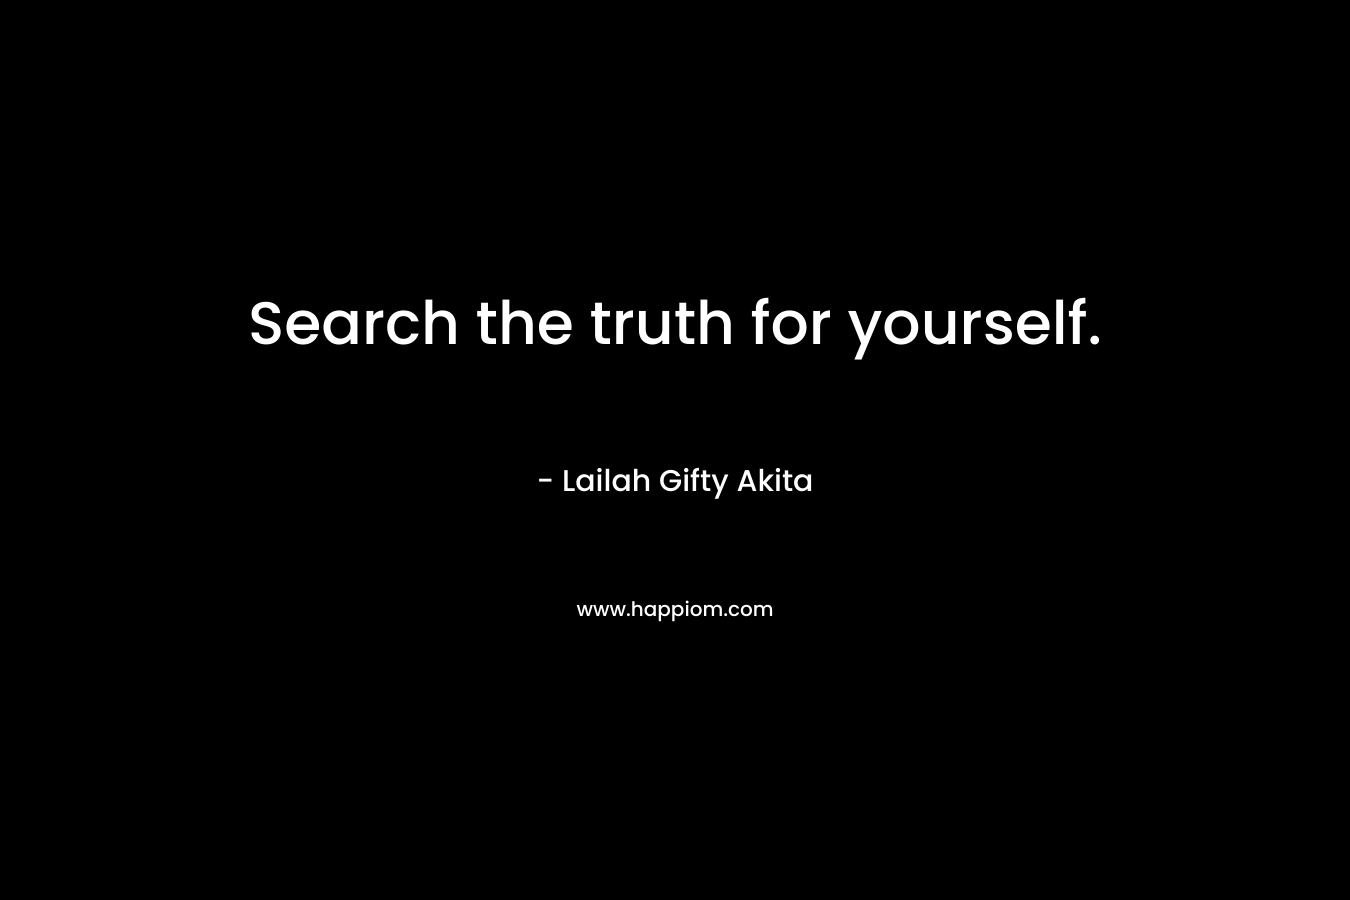 Search the truth for yourself. – Lailah Gifty Akita